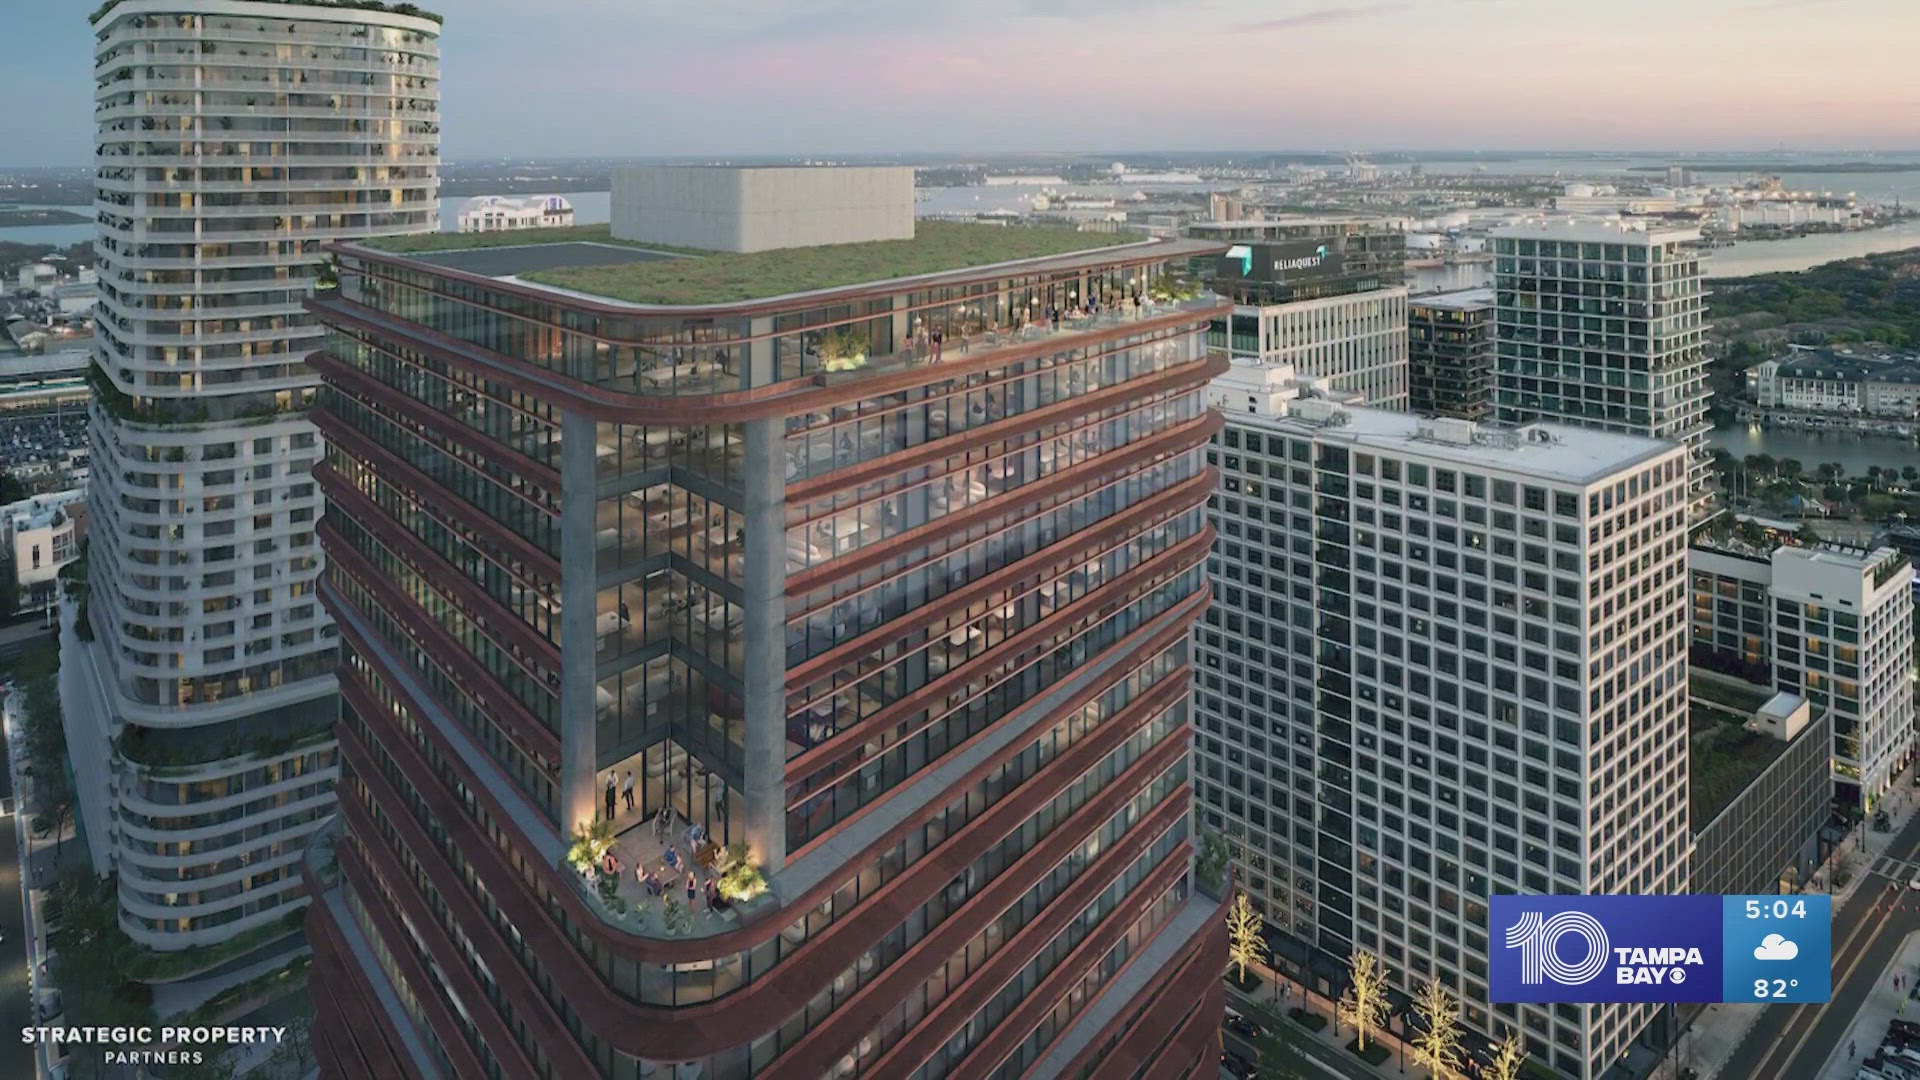 Newly released renderings reveal developers' 'vision' for the future of the area in Downtown Tampa as a center for business and entertainment.